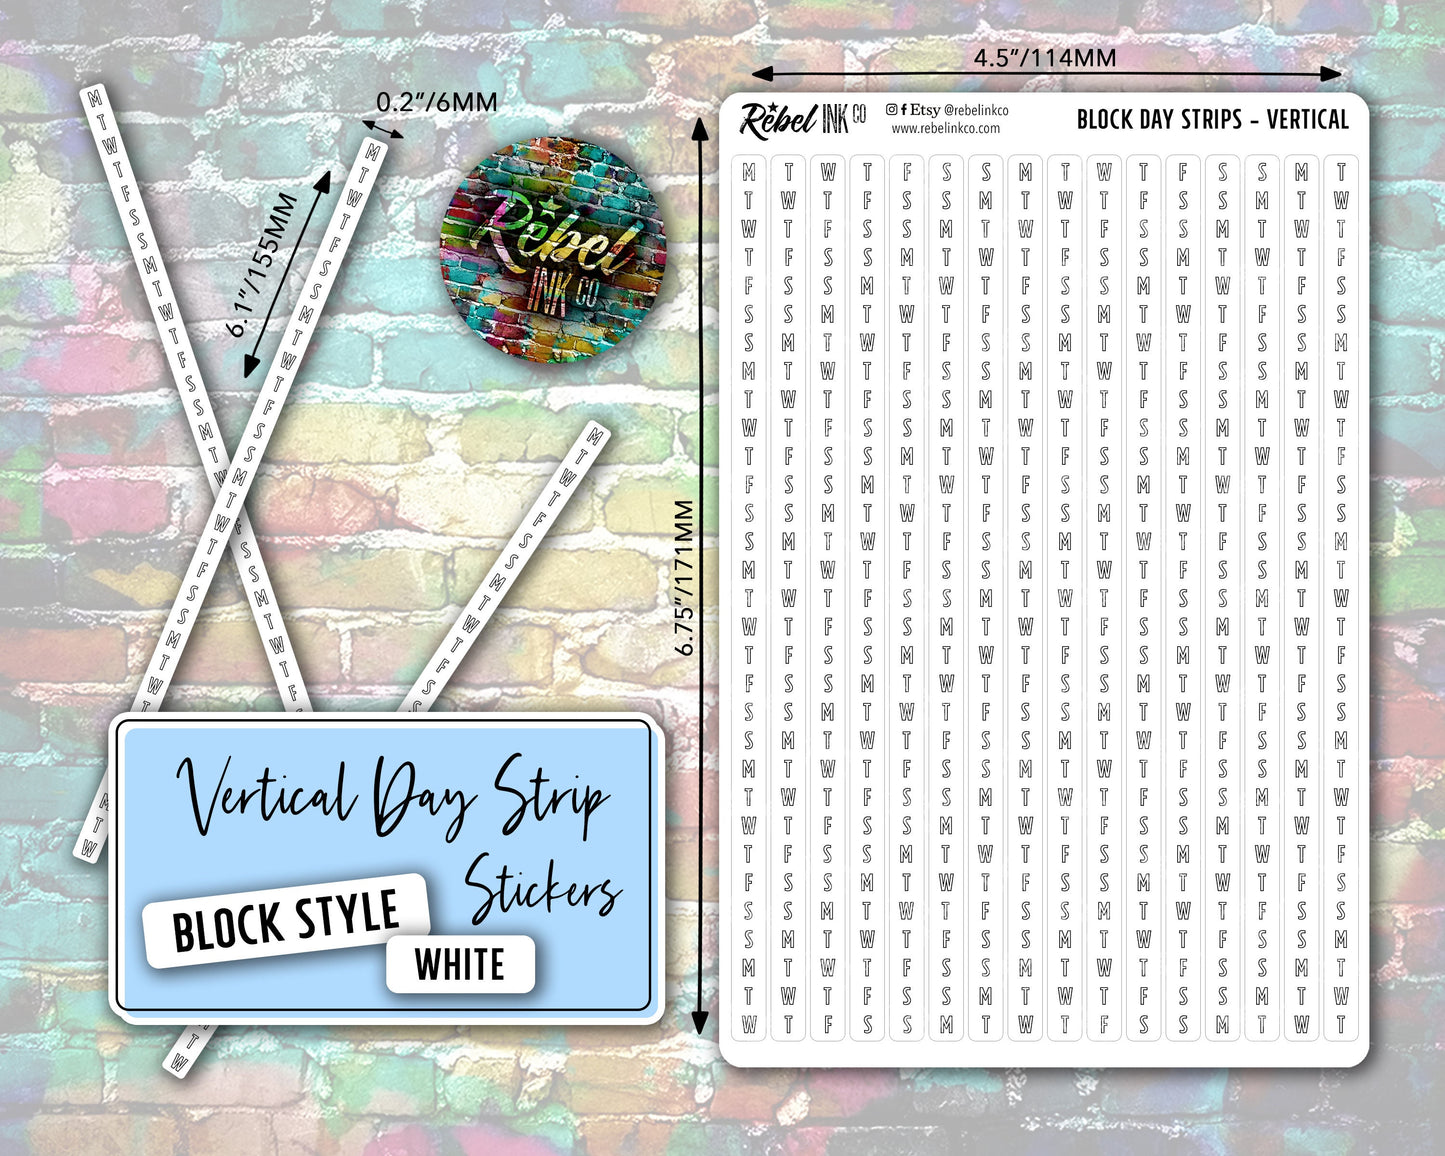 Vertical Day Strip Stickers - White - Block Style